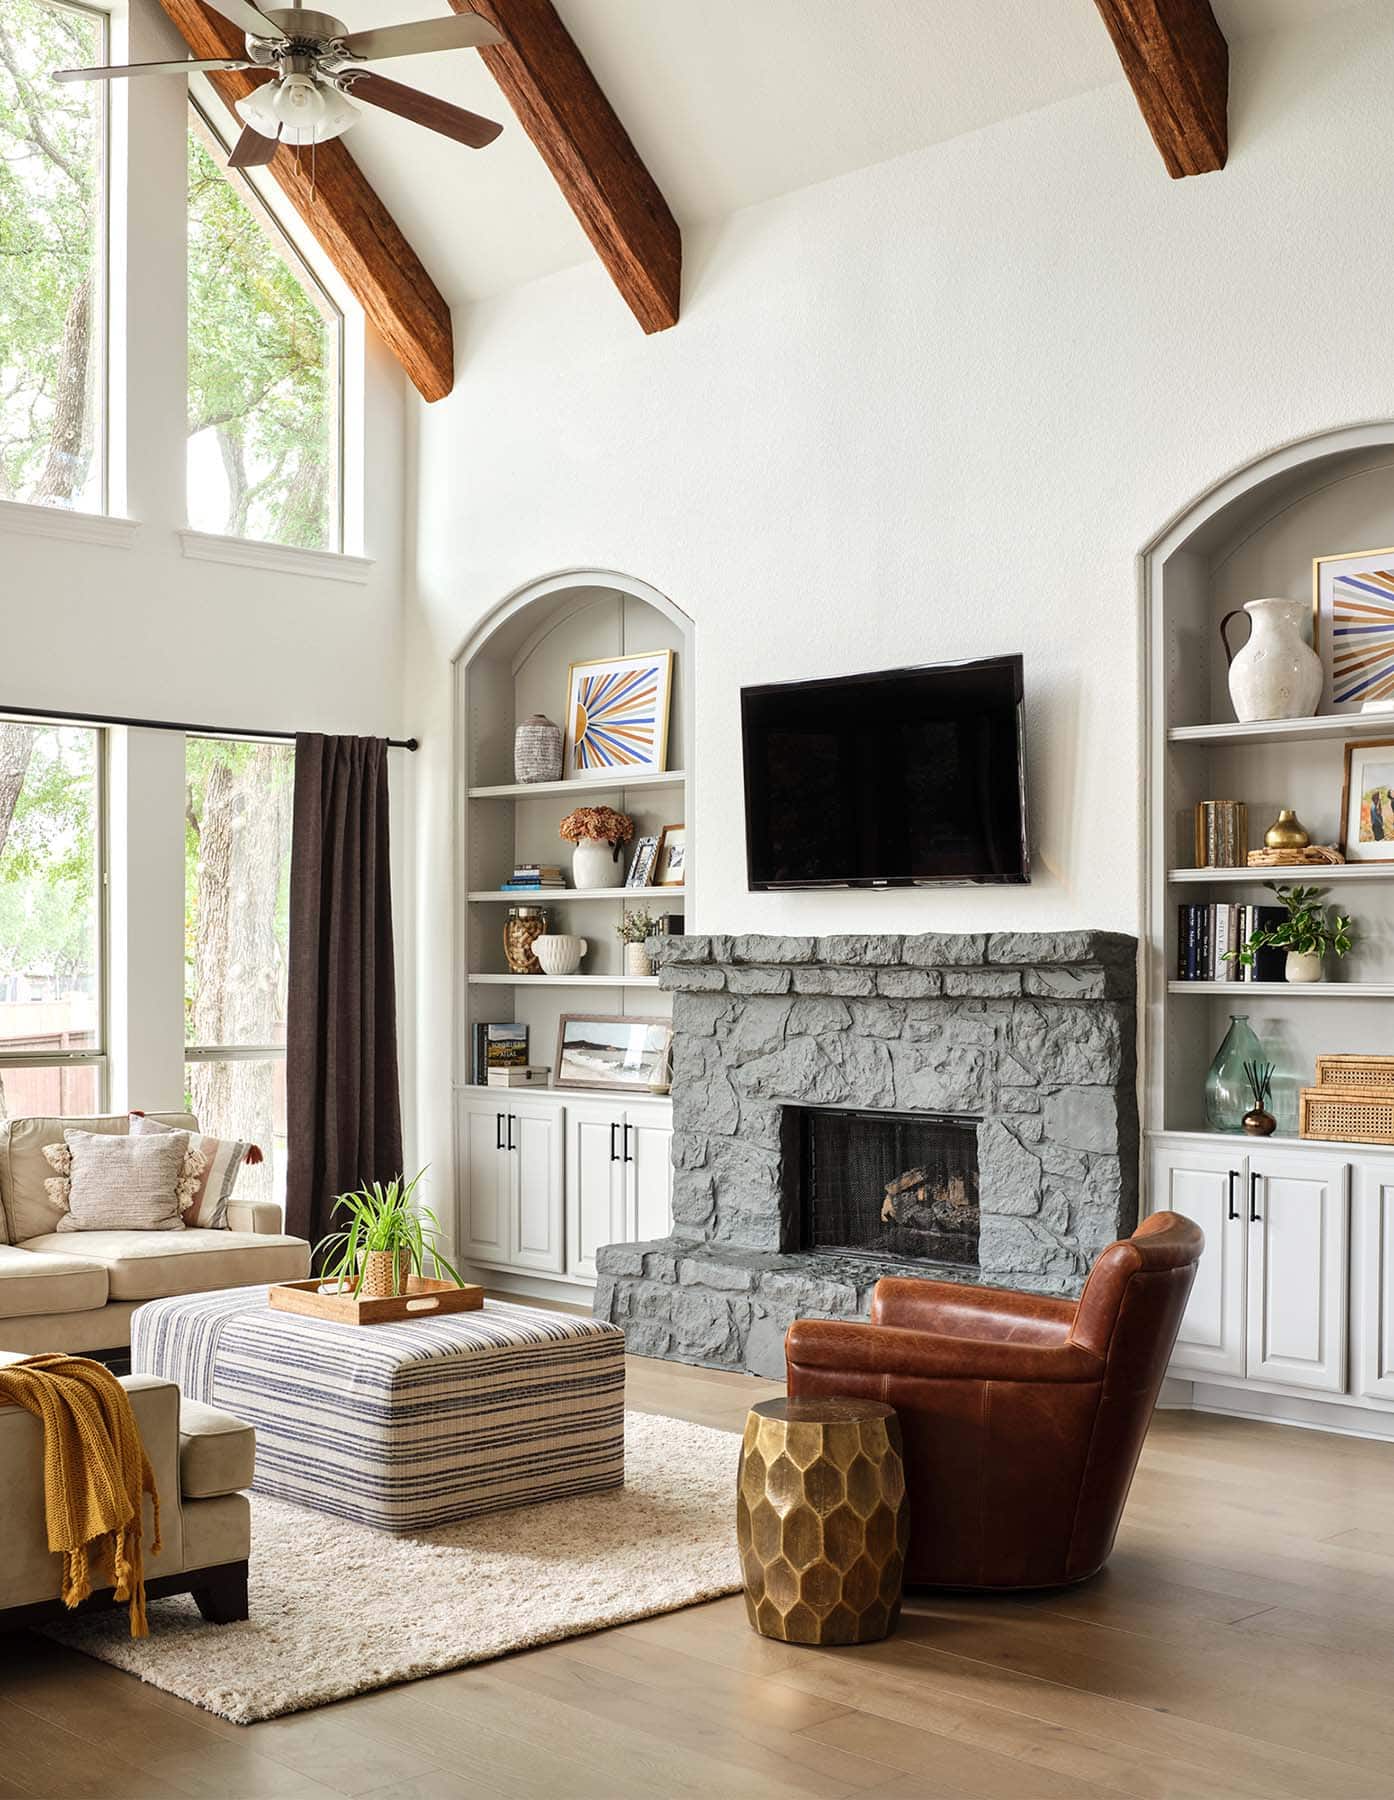 living-room-painted-built-in-bookshelves-in-sherwin-williams-light-french-gray-and-stone-fireplace-in-benjamin-moore-kendall-charcoal-austin-tx-home-painter-paper-moon-painting